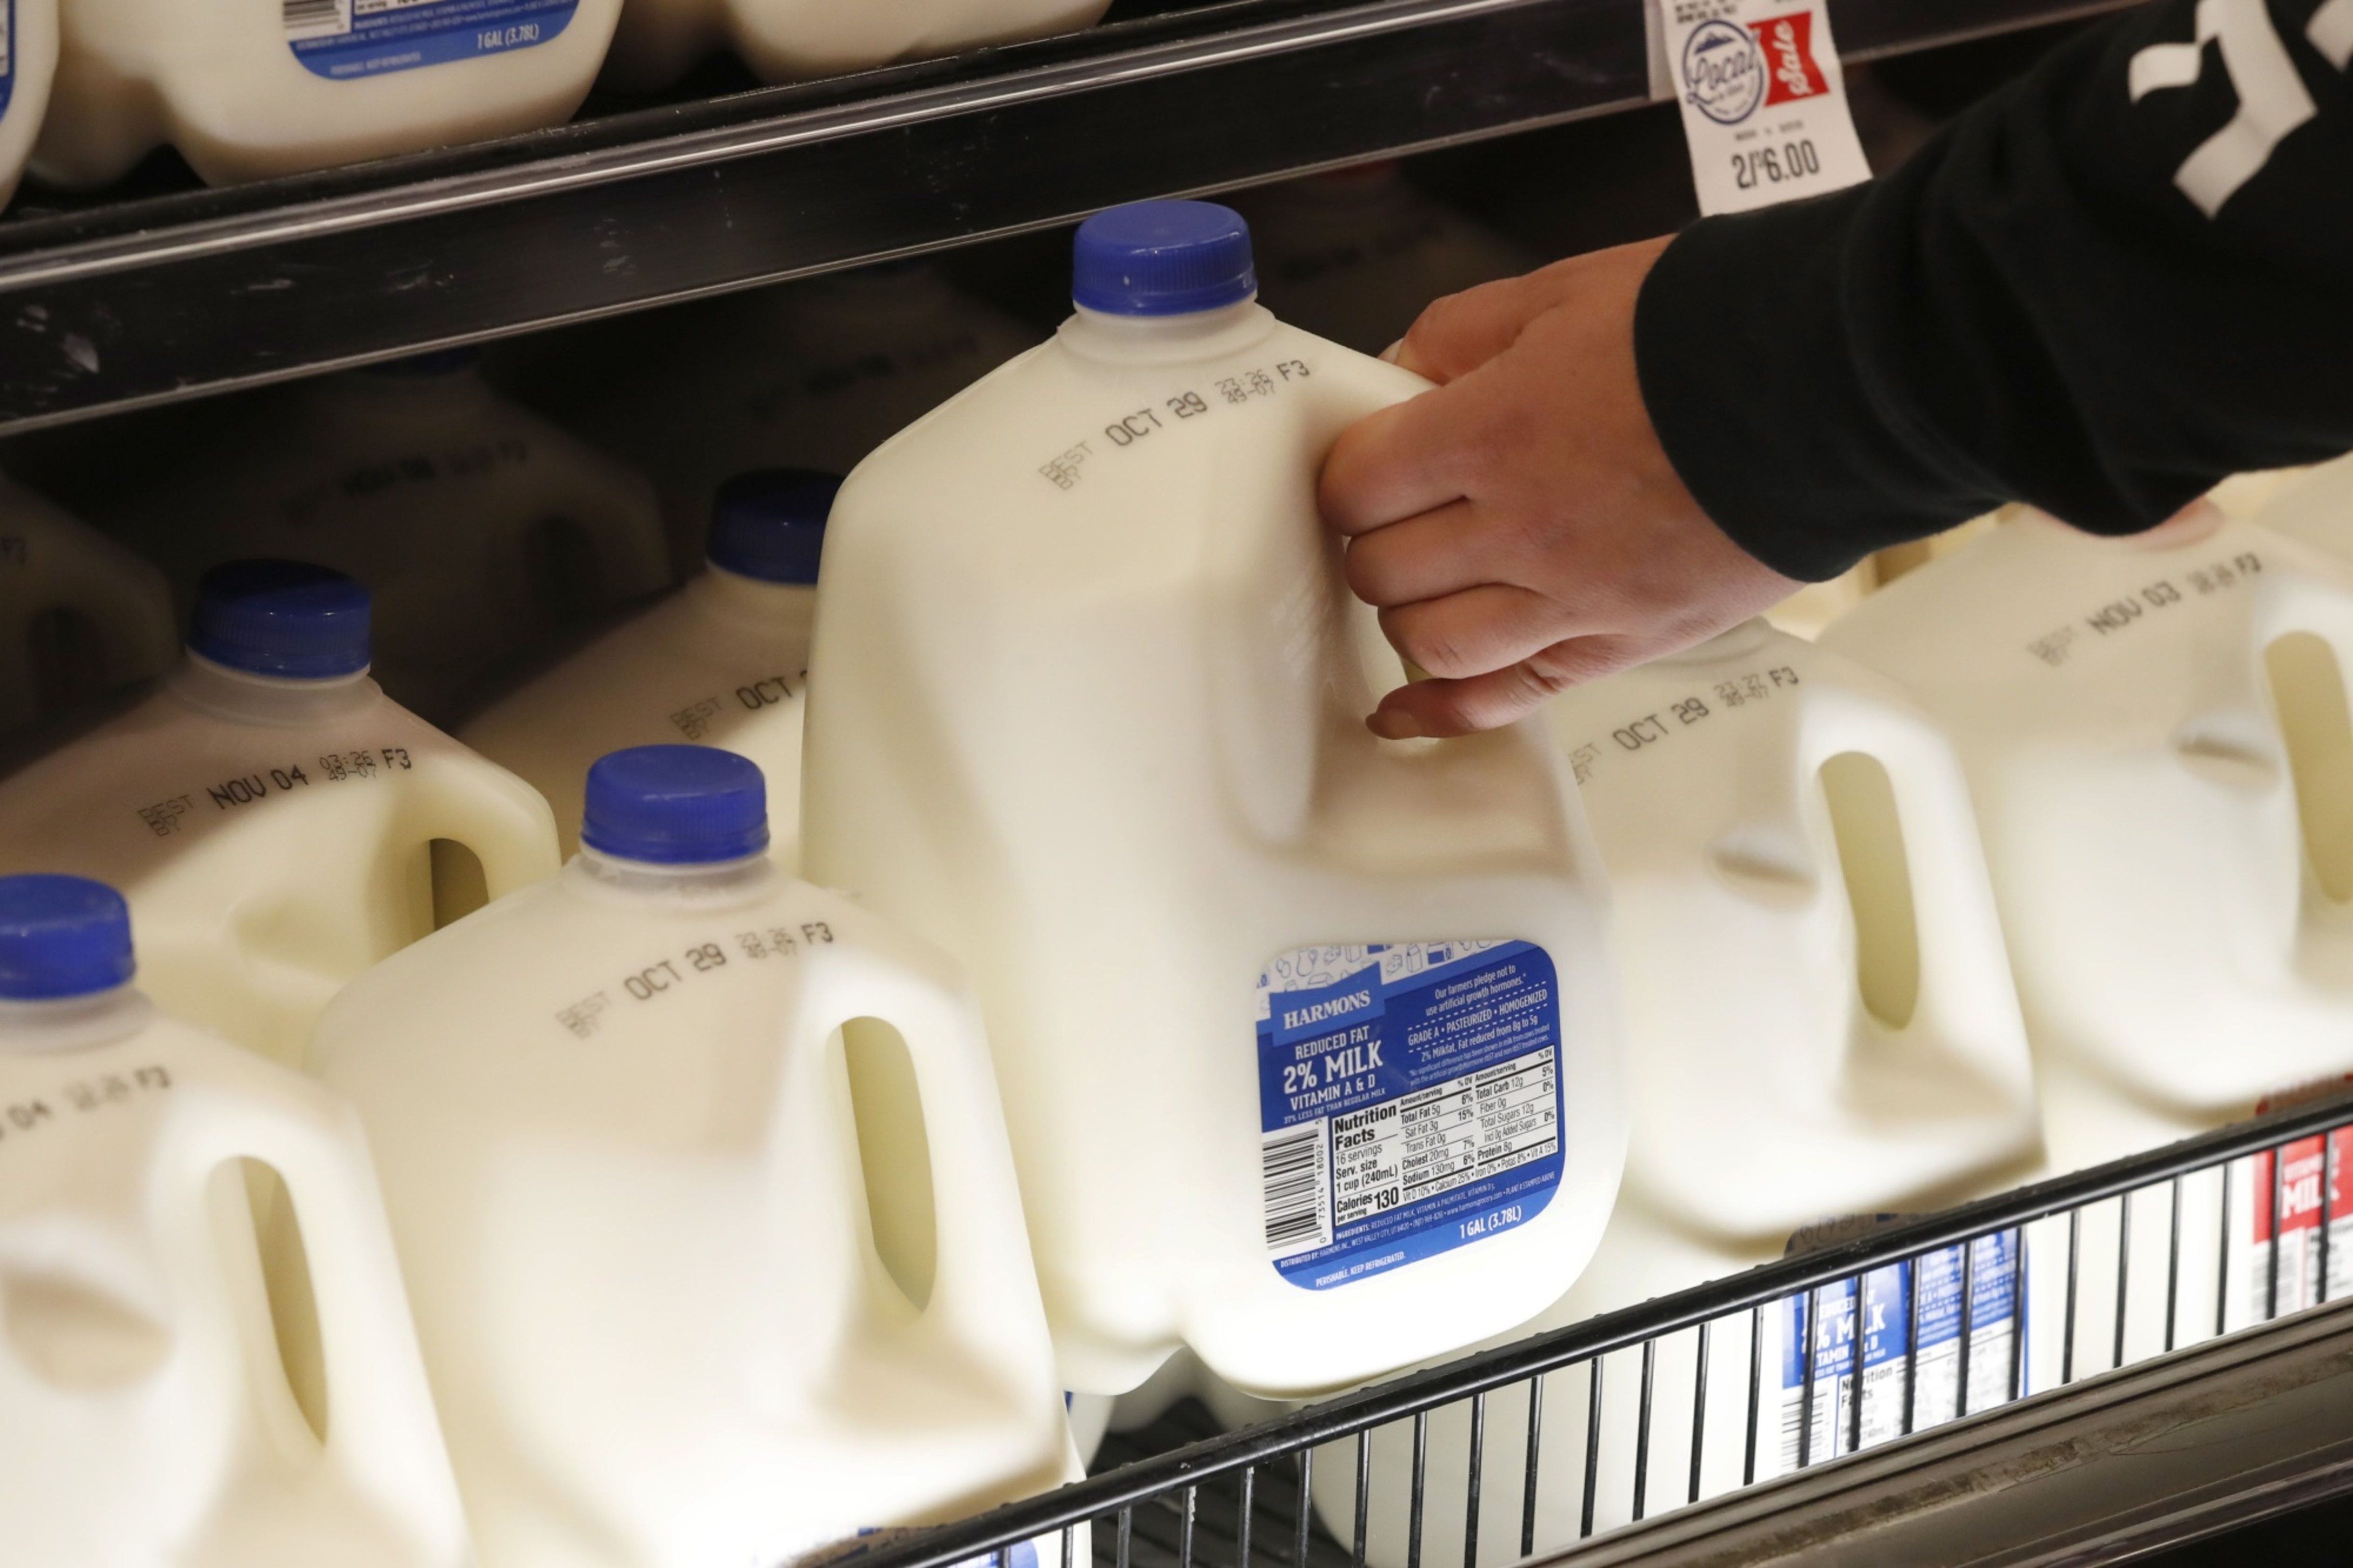 A customer picks up a gallon of milk for sale at Harmons Grocery store in Salt Lake City, Utah, U.S., on Thursday, Oct. 21, 2021. (George Frey/Bloomberg)